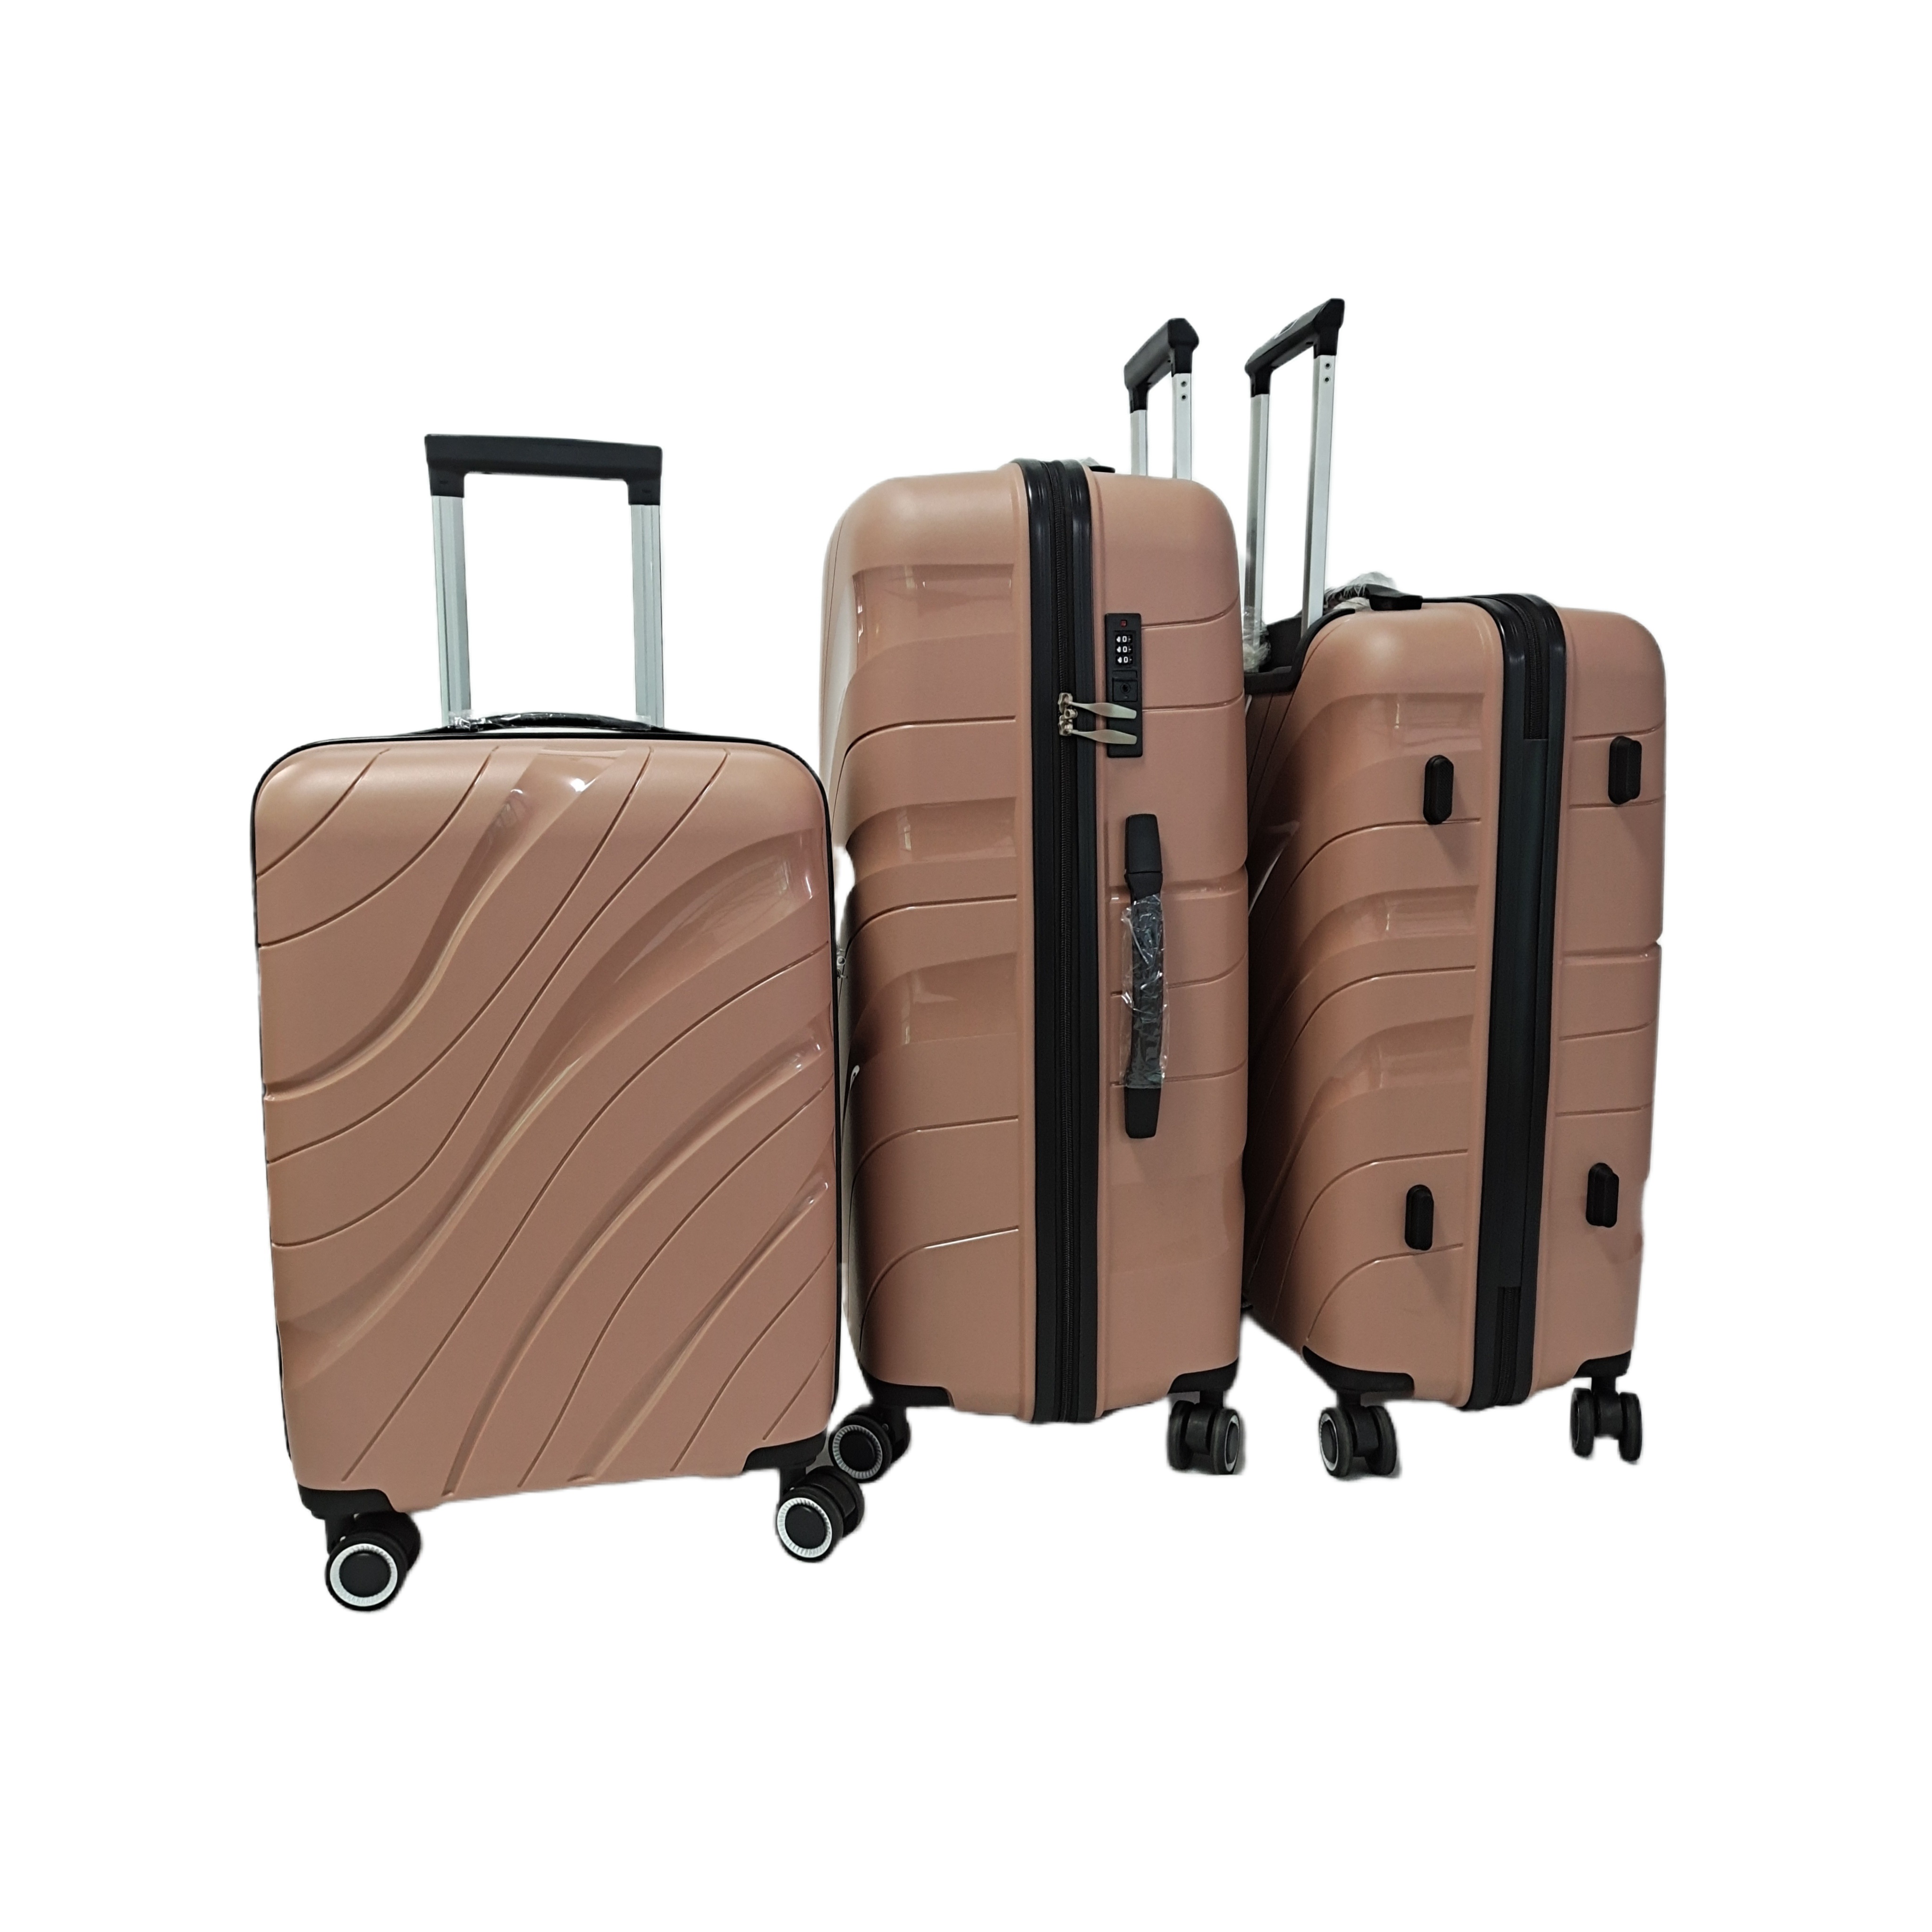 Anti-Scrapping Rolling PP Luggage for Travelling PP Suitcase Set of 3